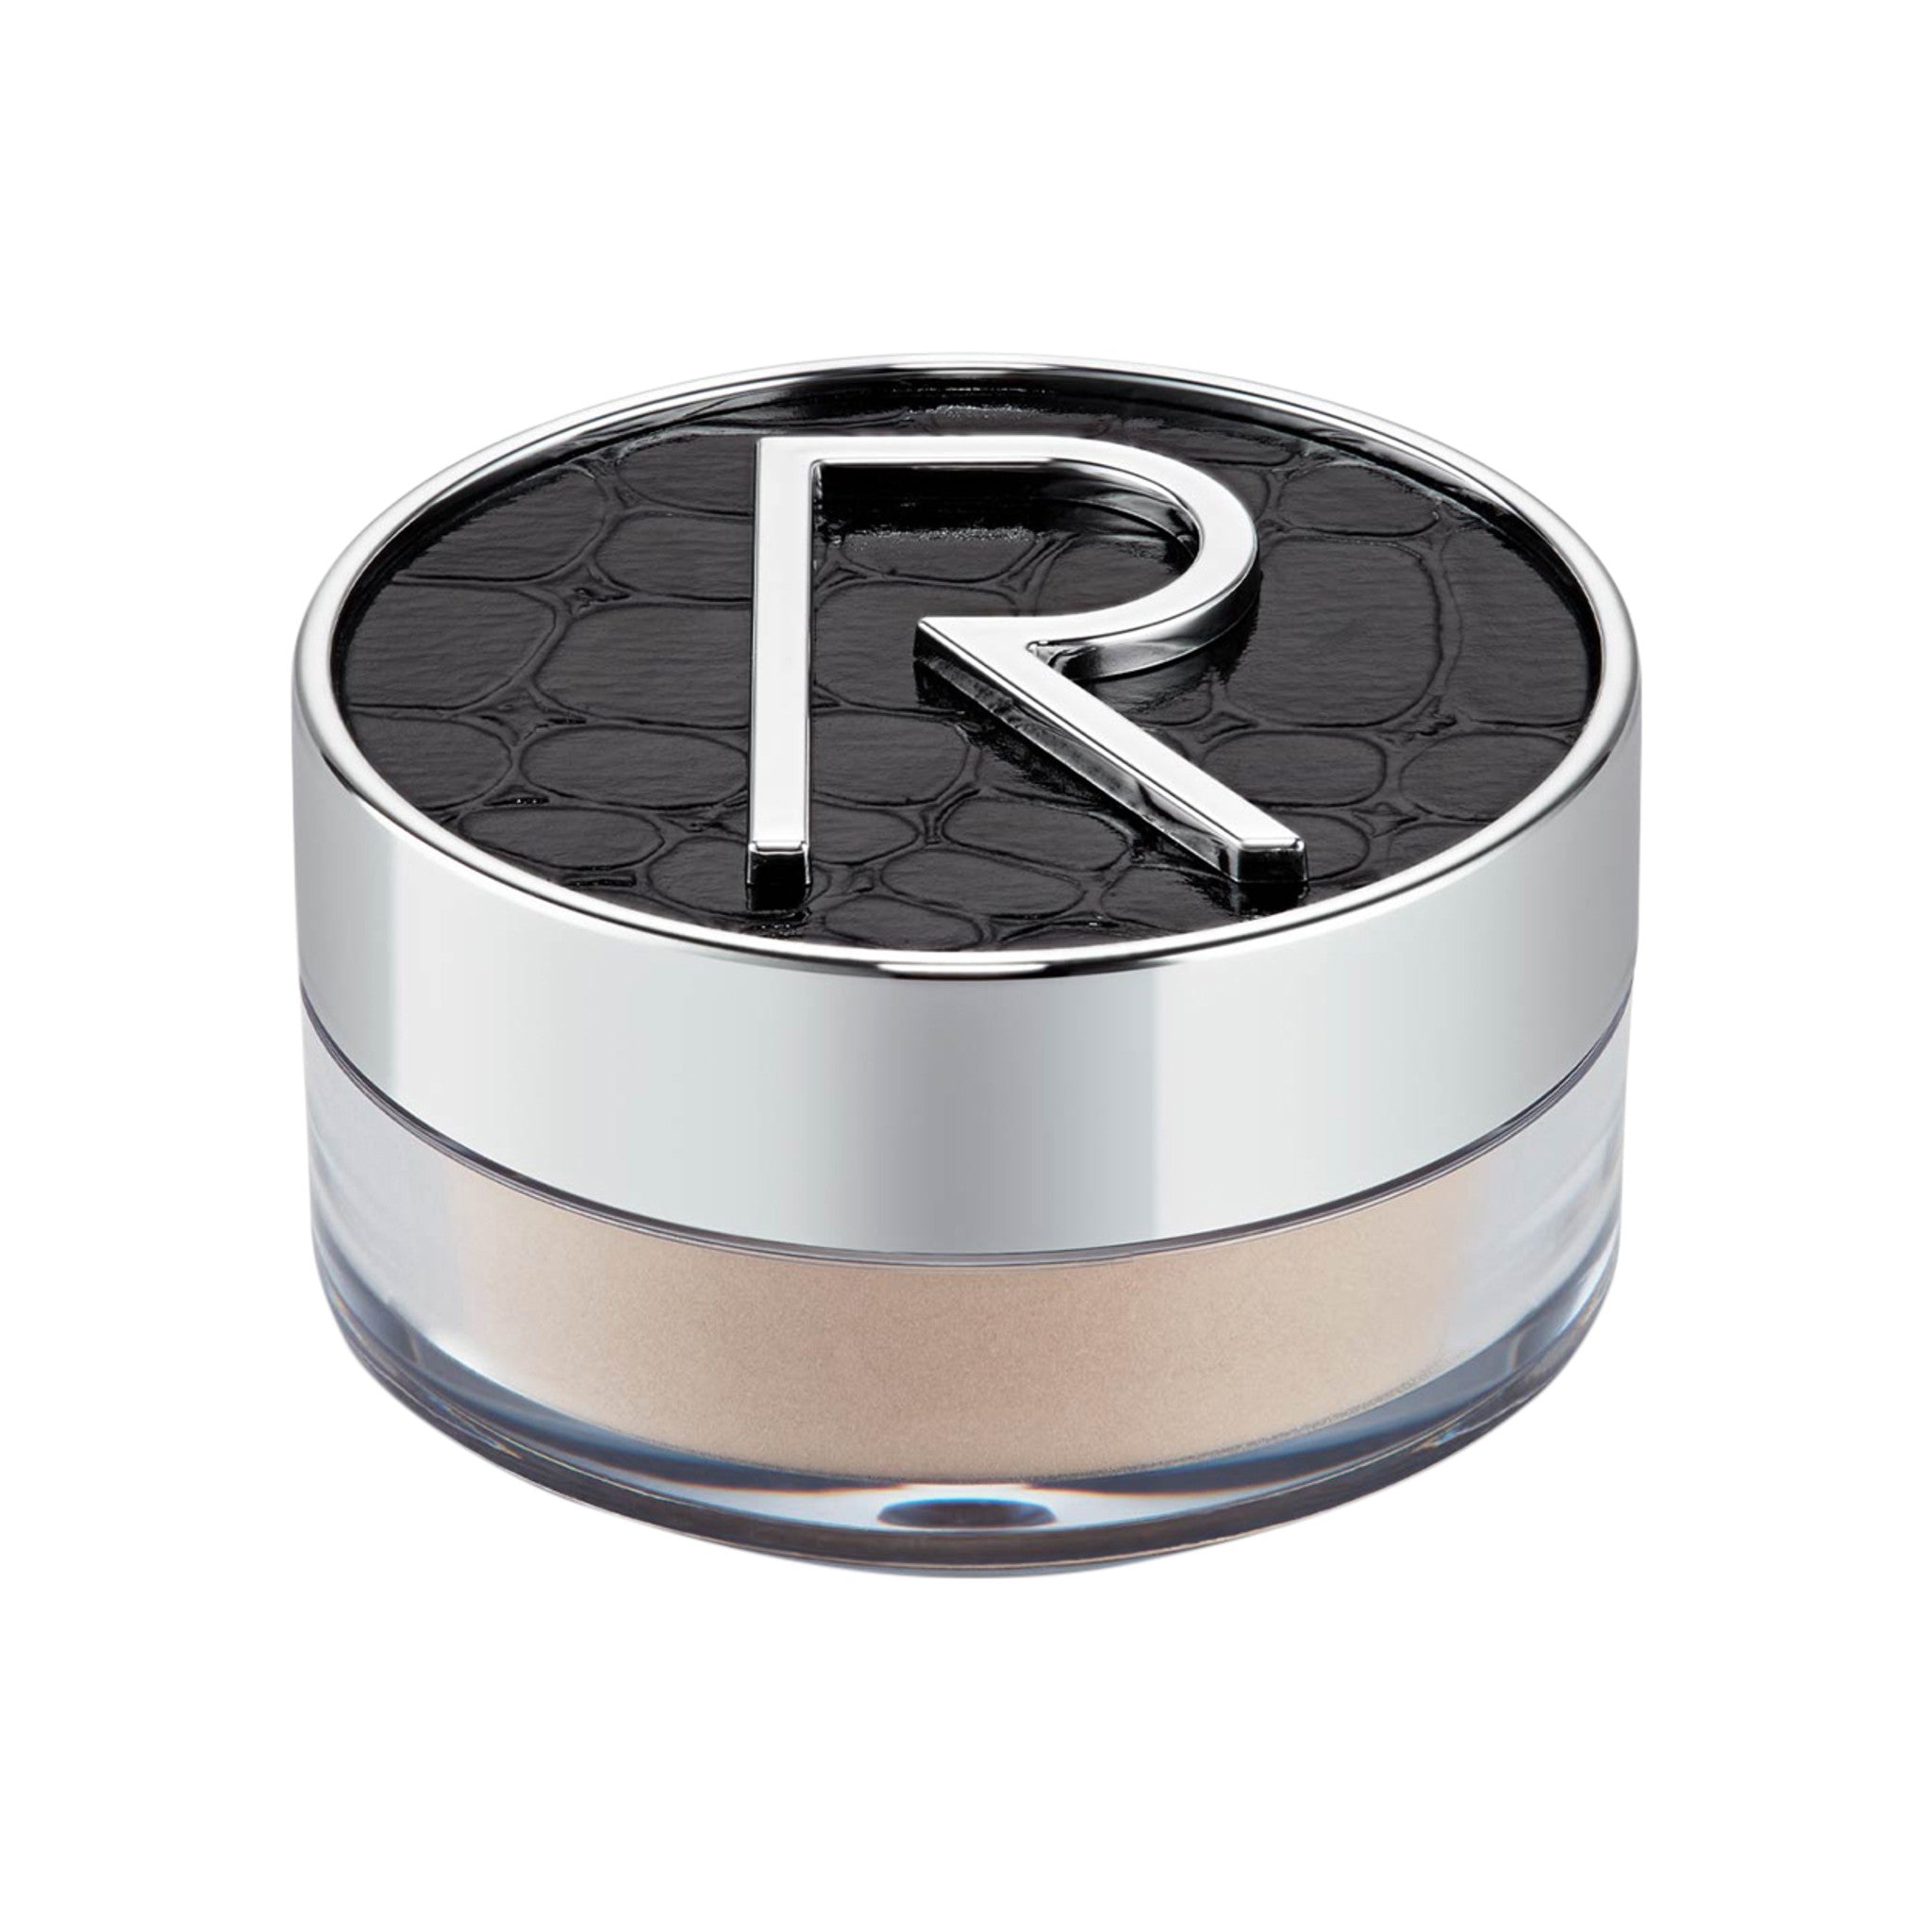 Rodial Glass Powder Deluxe, 0.19 oz main image. This product is in the color nude